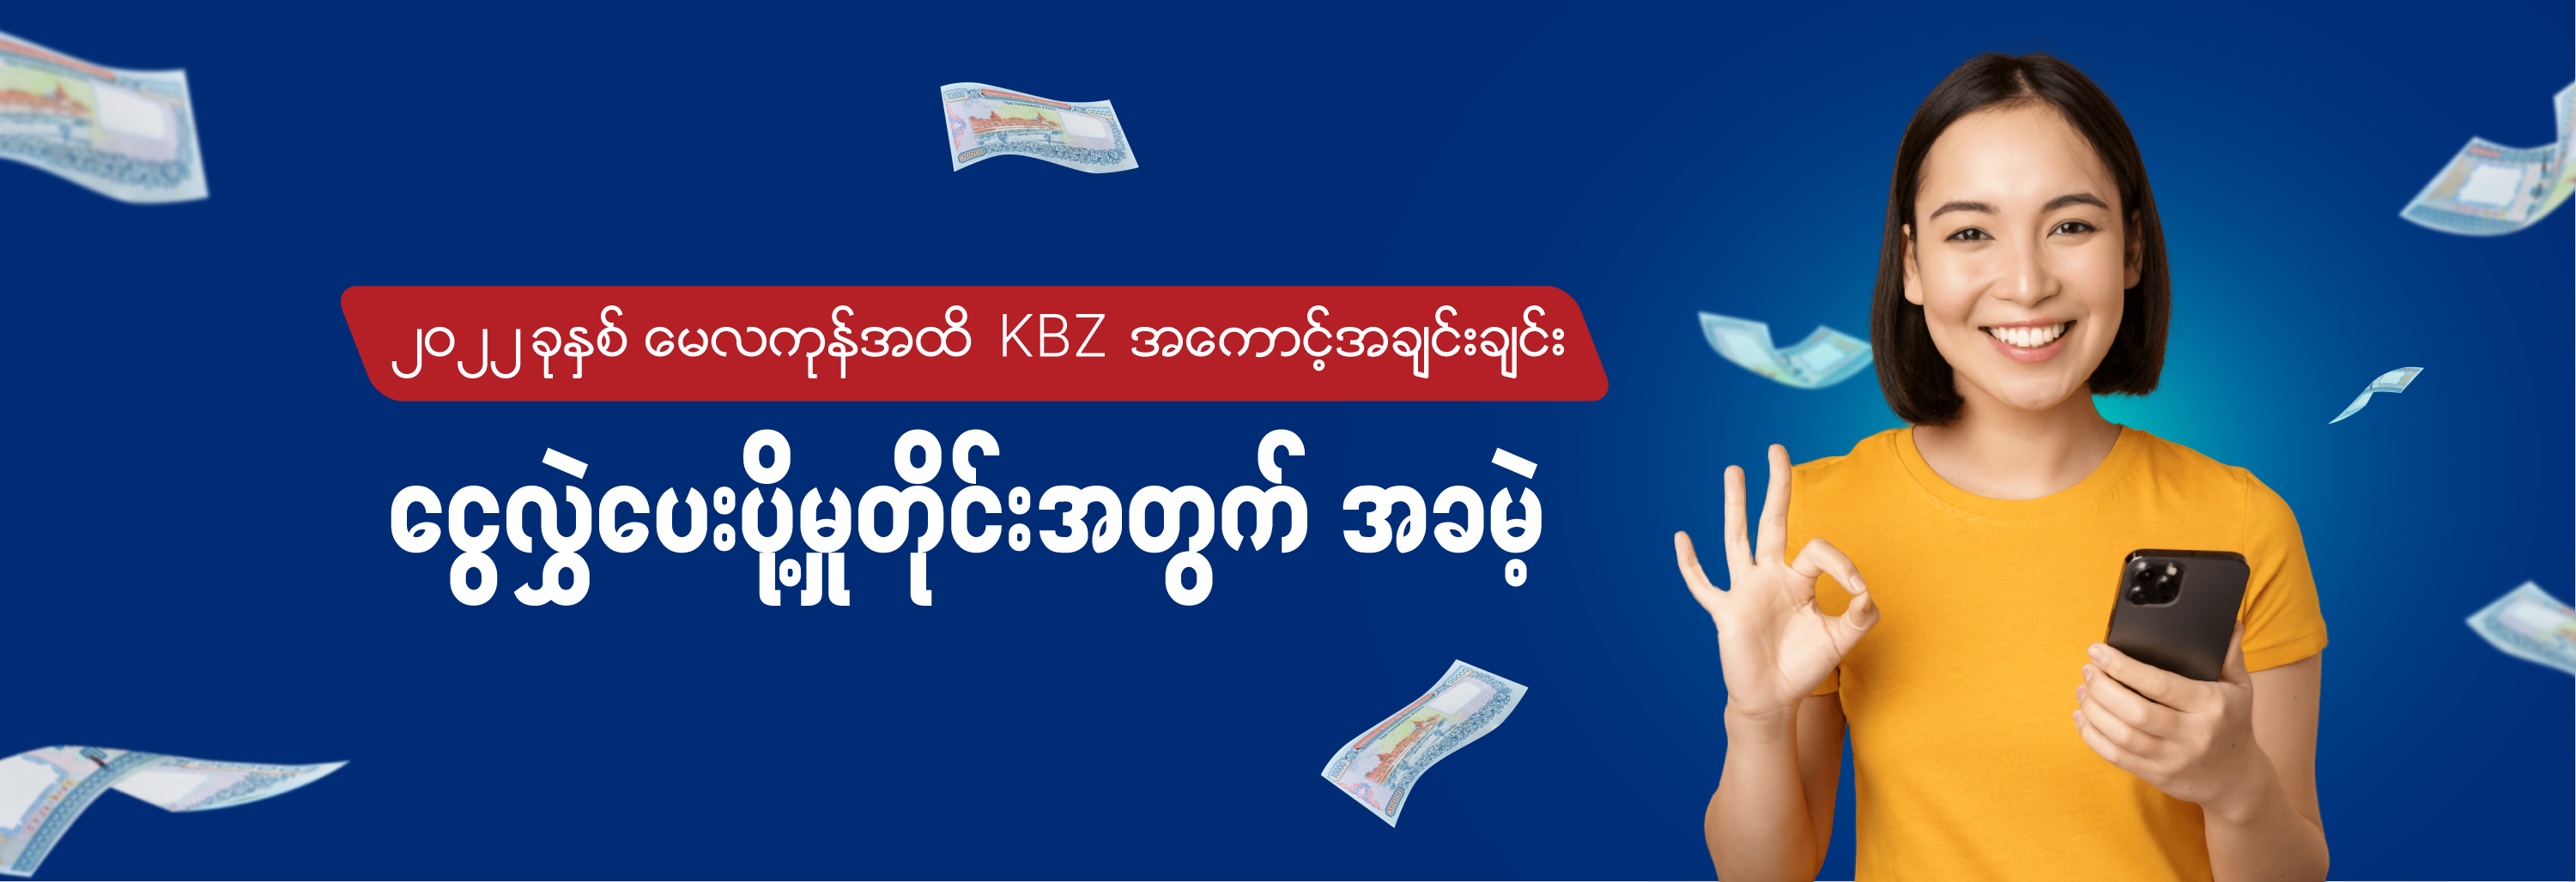 No Fees for KBZ to KBZ Online Transfer Is Extended Until The End of May 2022